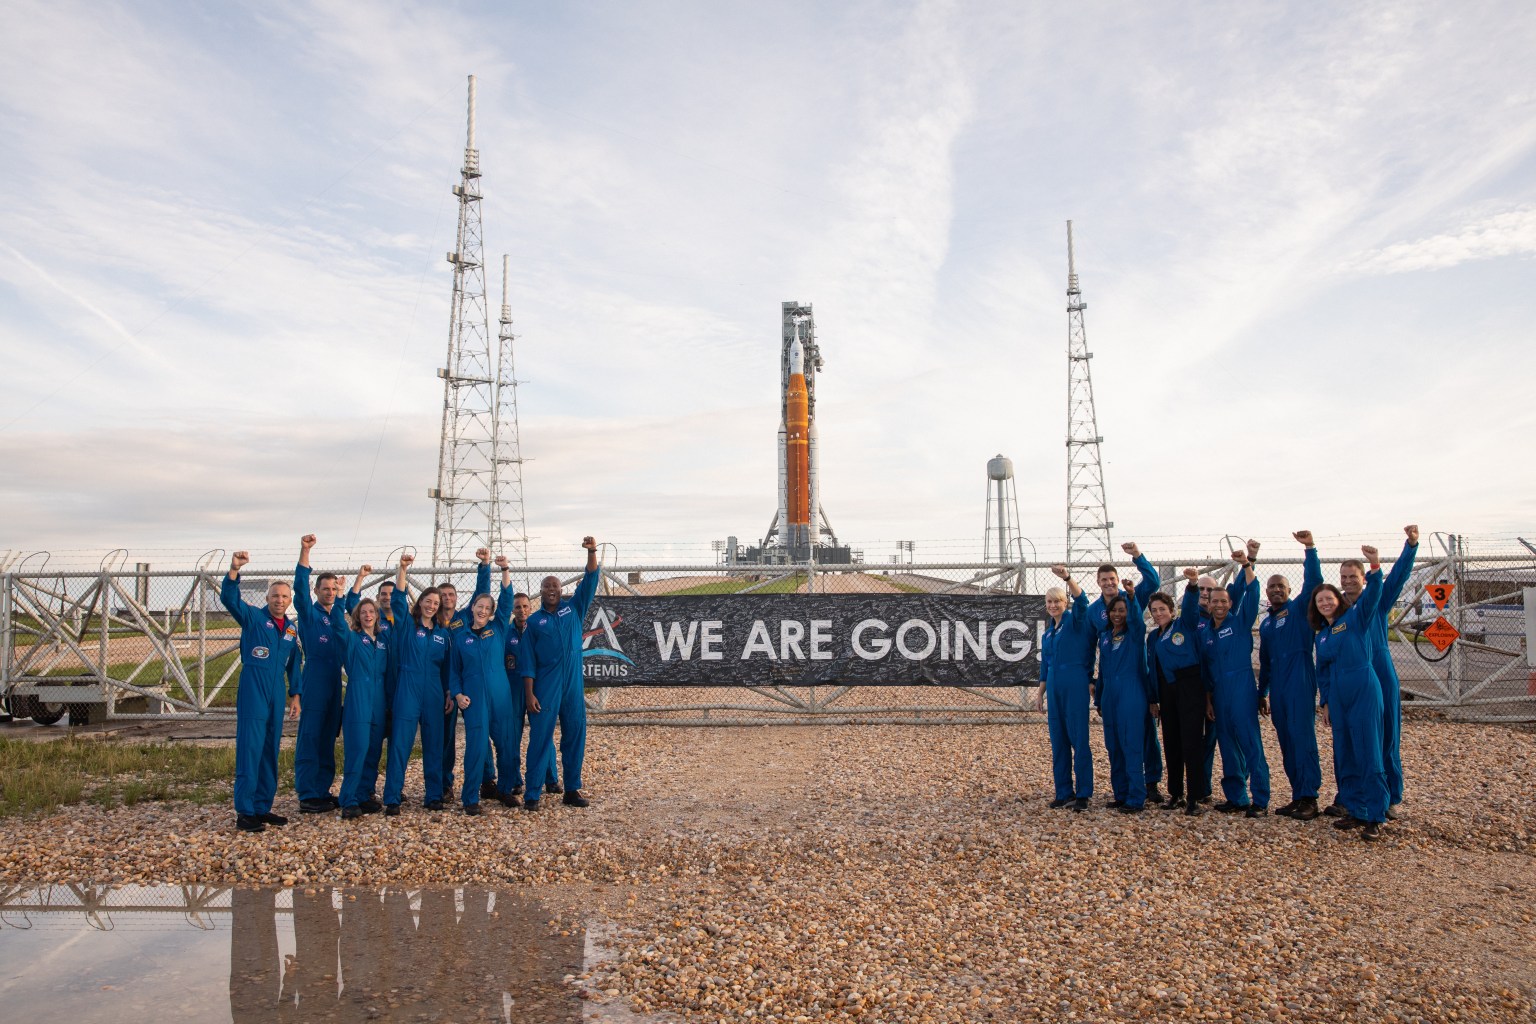 Eighteen astronauts and astronaut candidates in blue flight suits each raise a fist as they pose for a photo outside the gate of Launch Pad 39B.